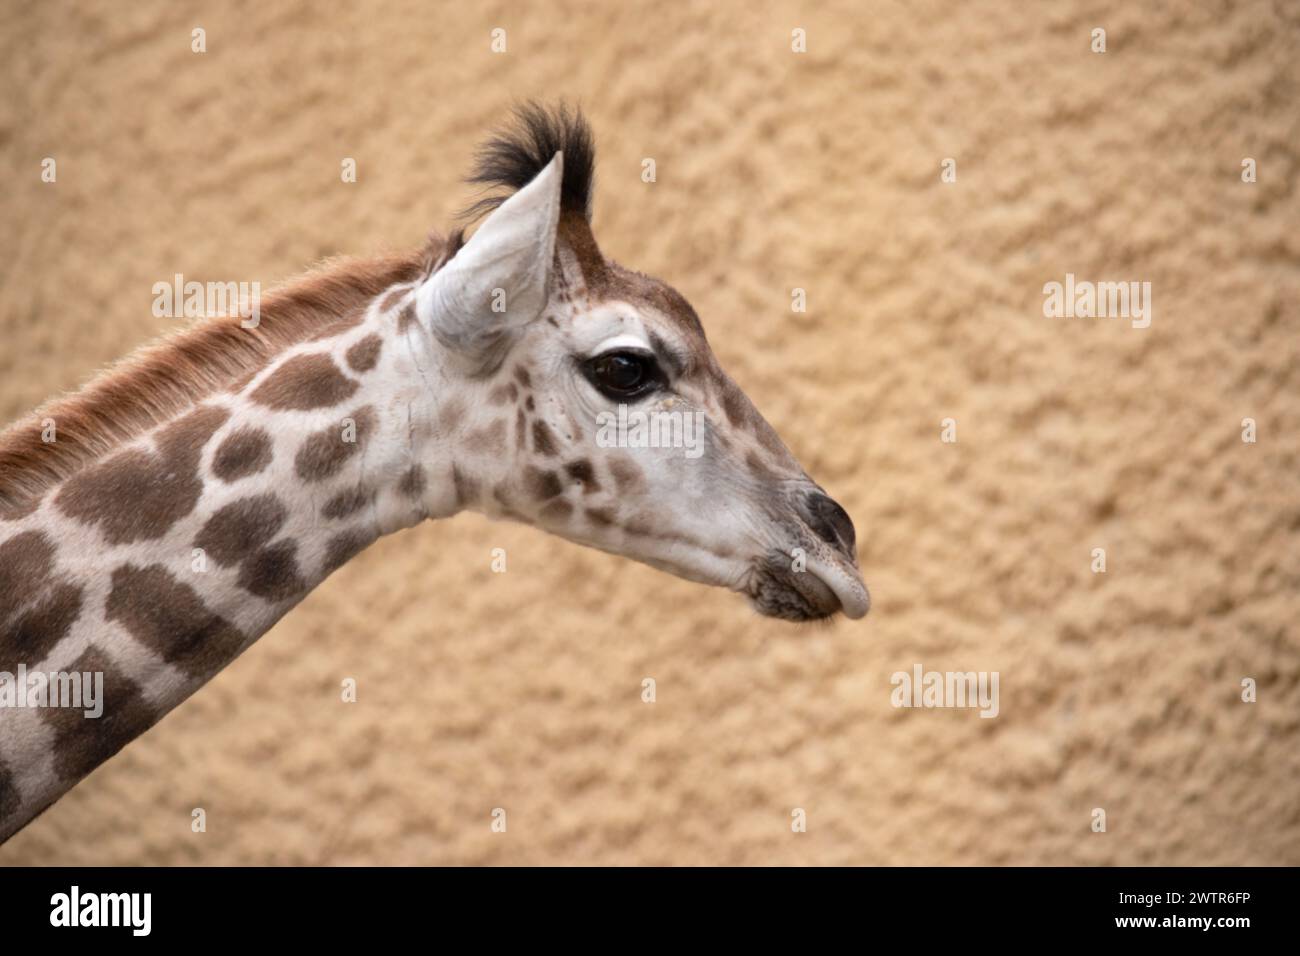 The giraffe is the tallest of all mammals. The legs and neck are extremely long. The giraffe has a short body, a tufted tail, a short mane, and short Stock Photo